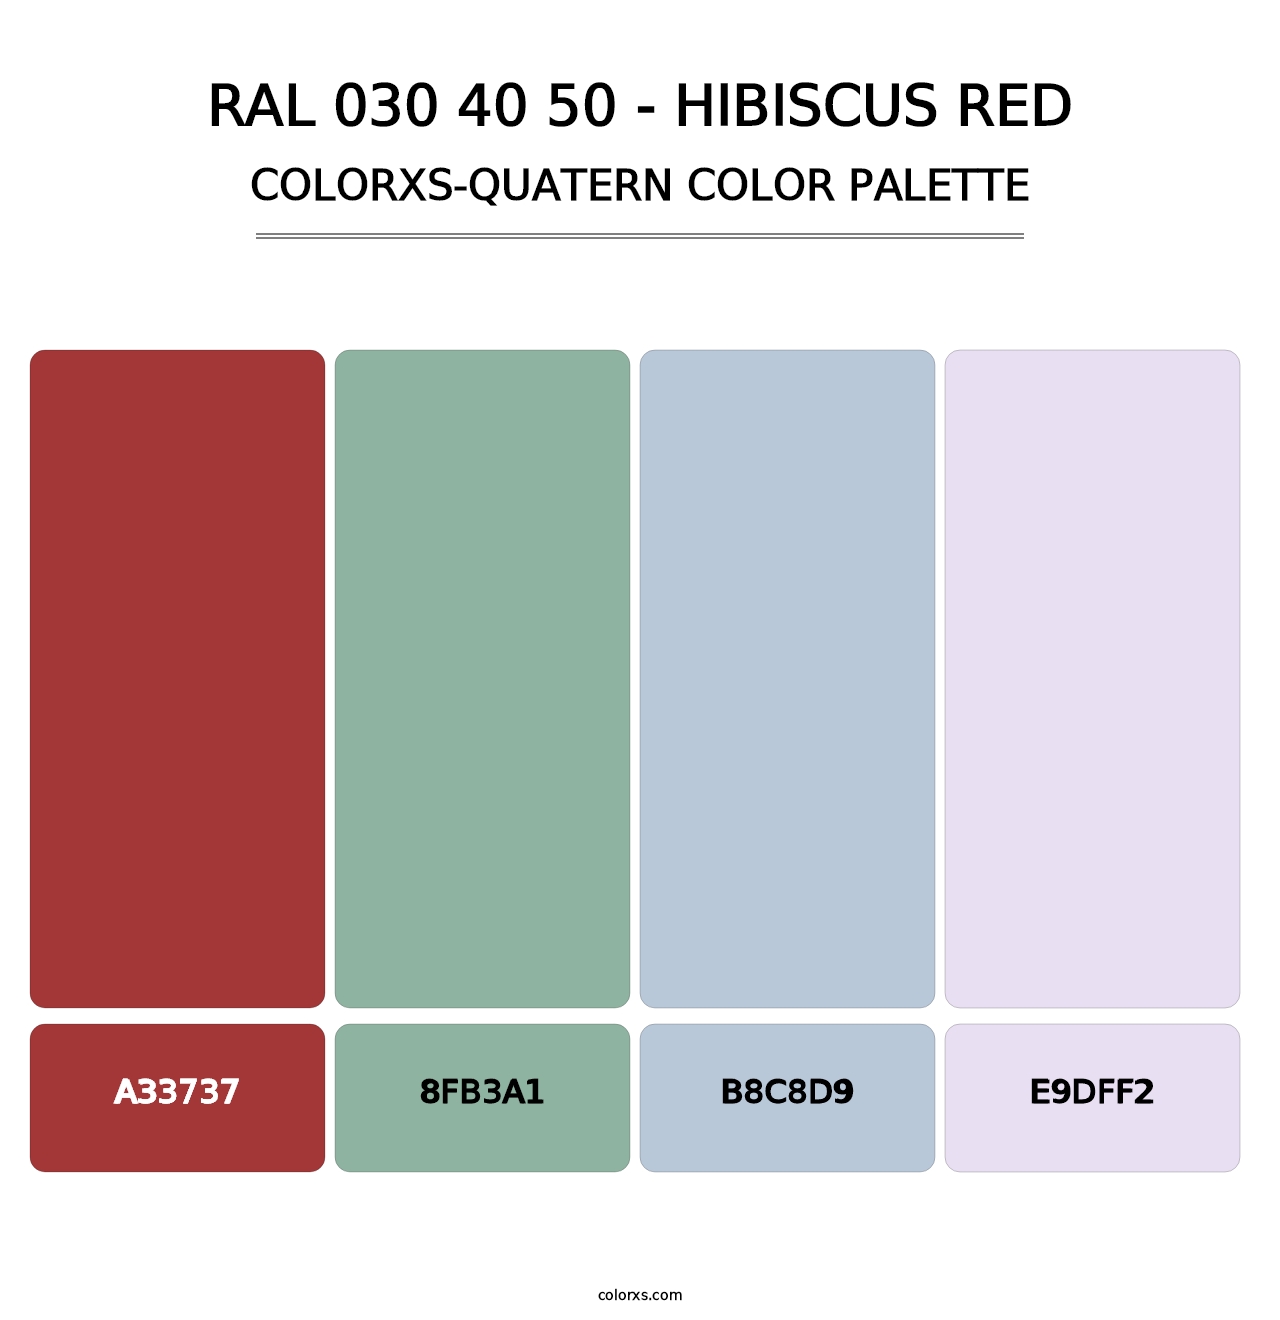 RAL 030 40 50 - Hibiscus Red - Colorxs Quatern Palette